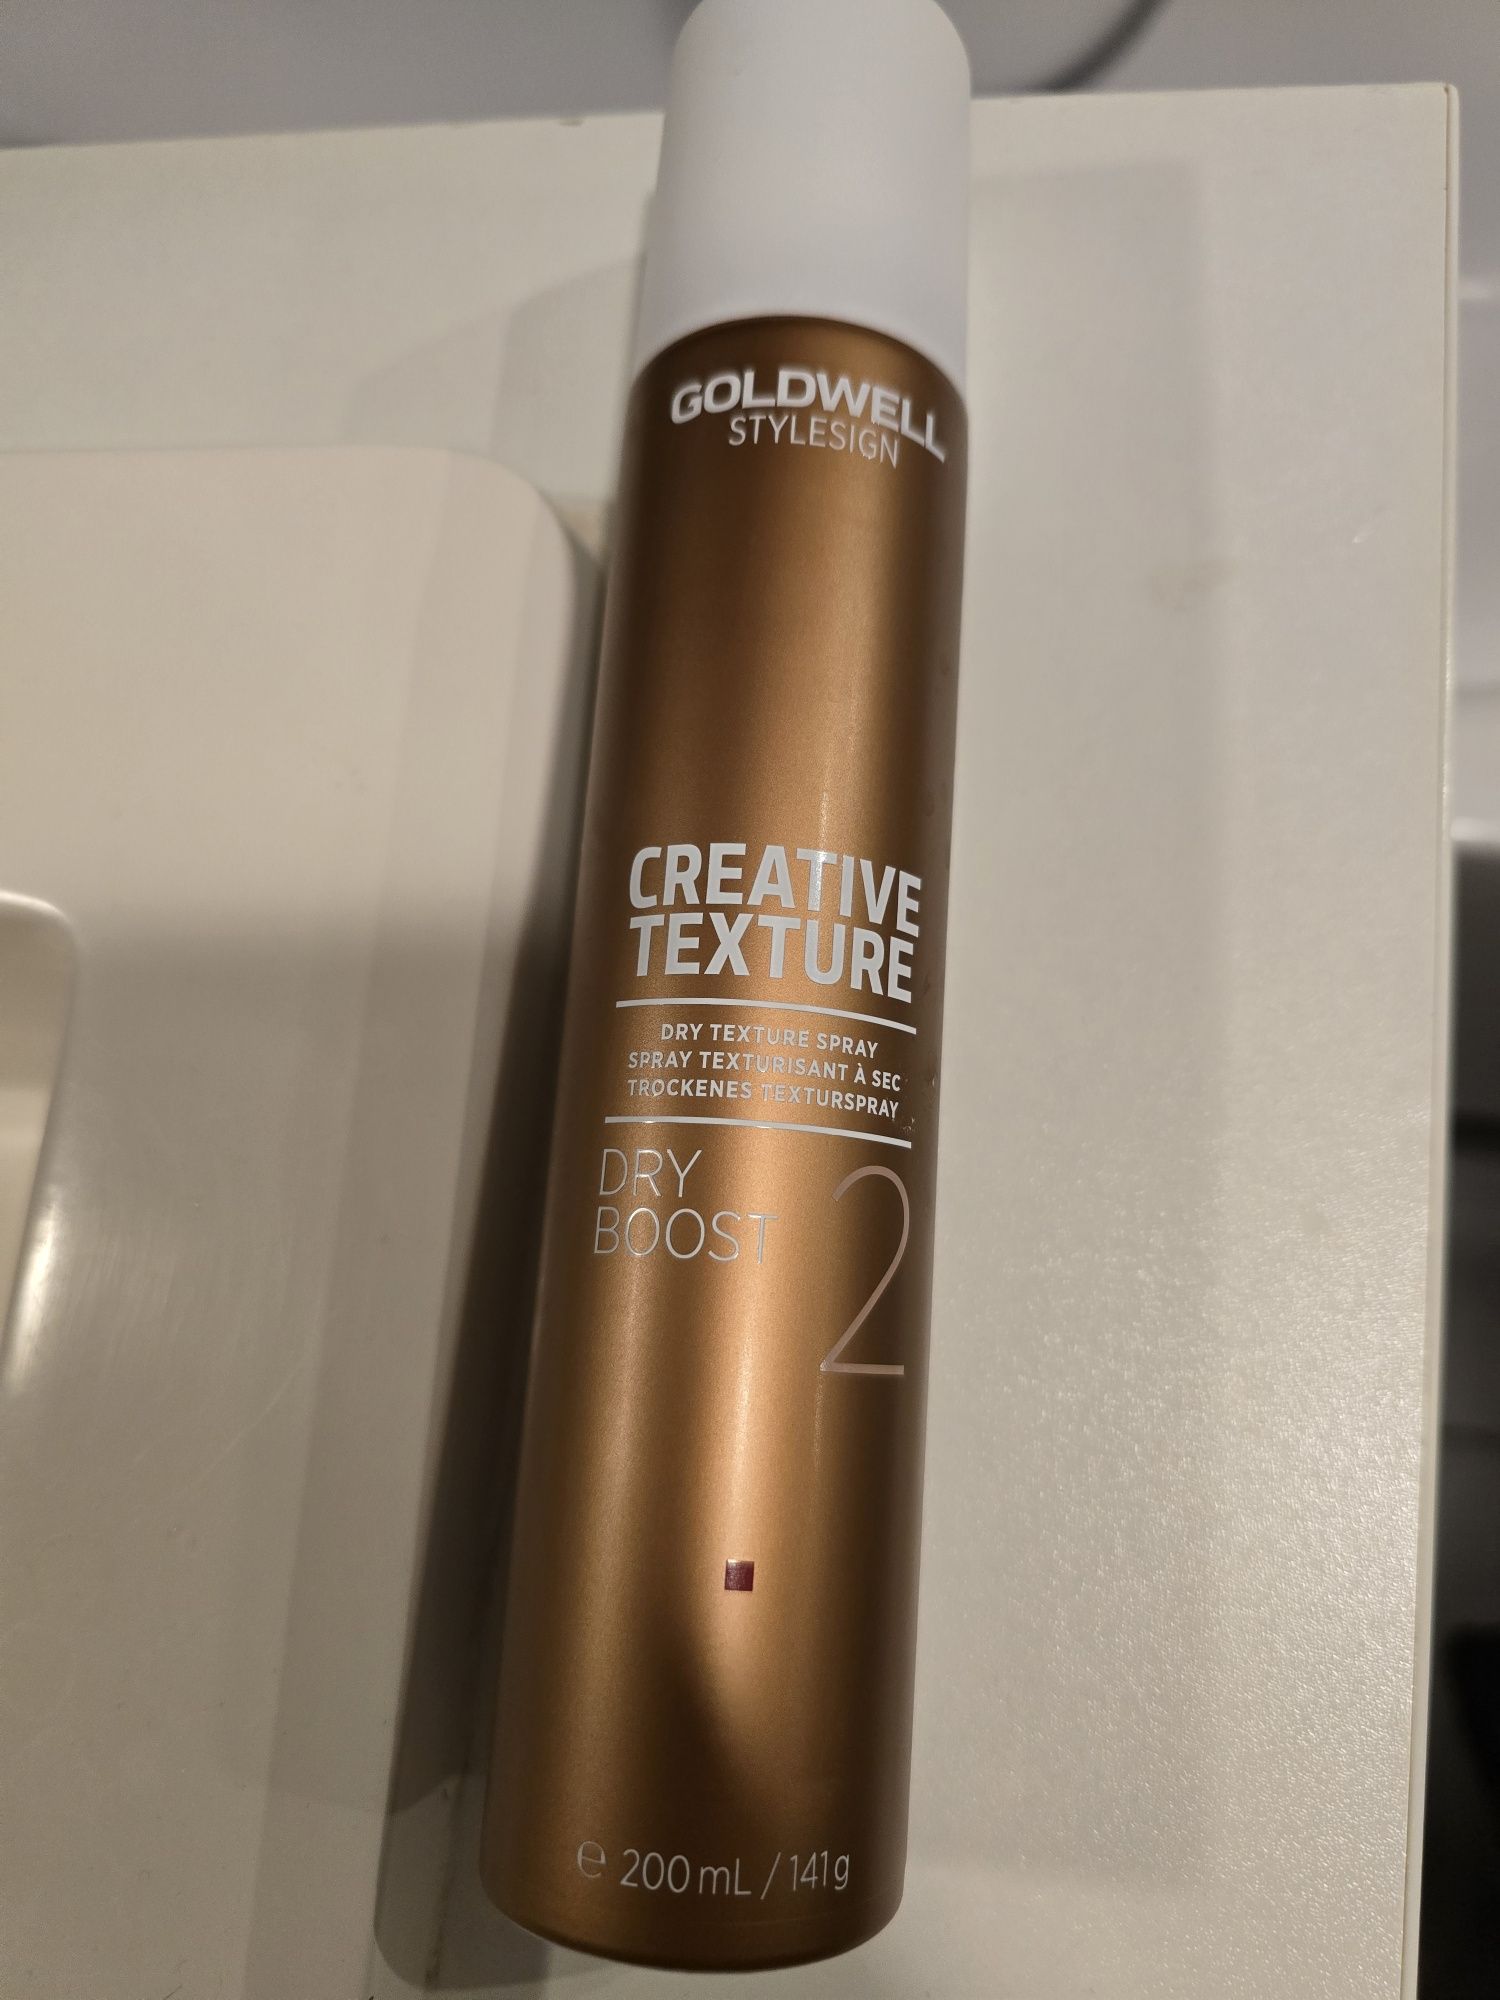 Lakier Goldwell creative texture dry boost 2